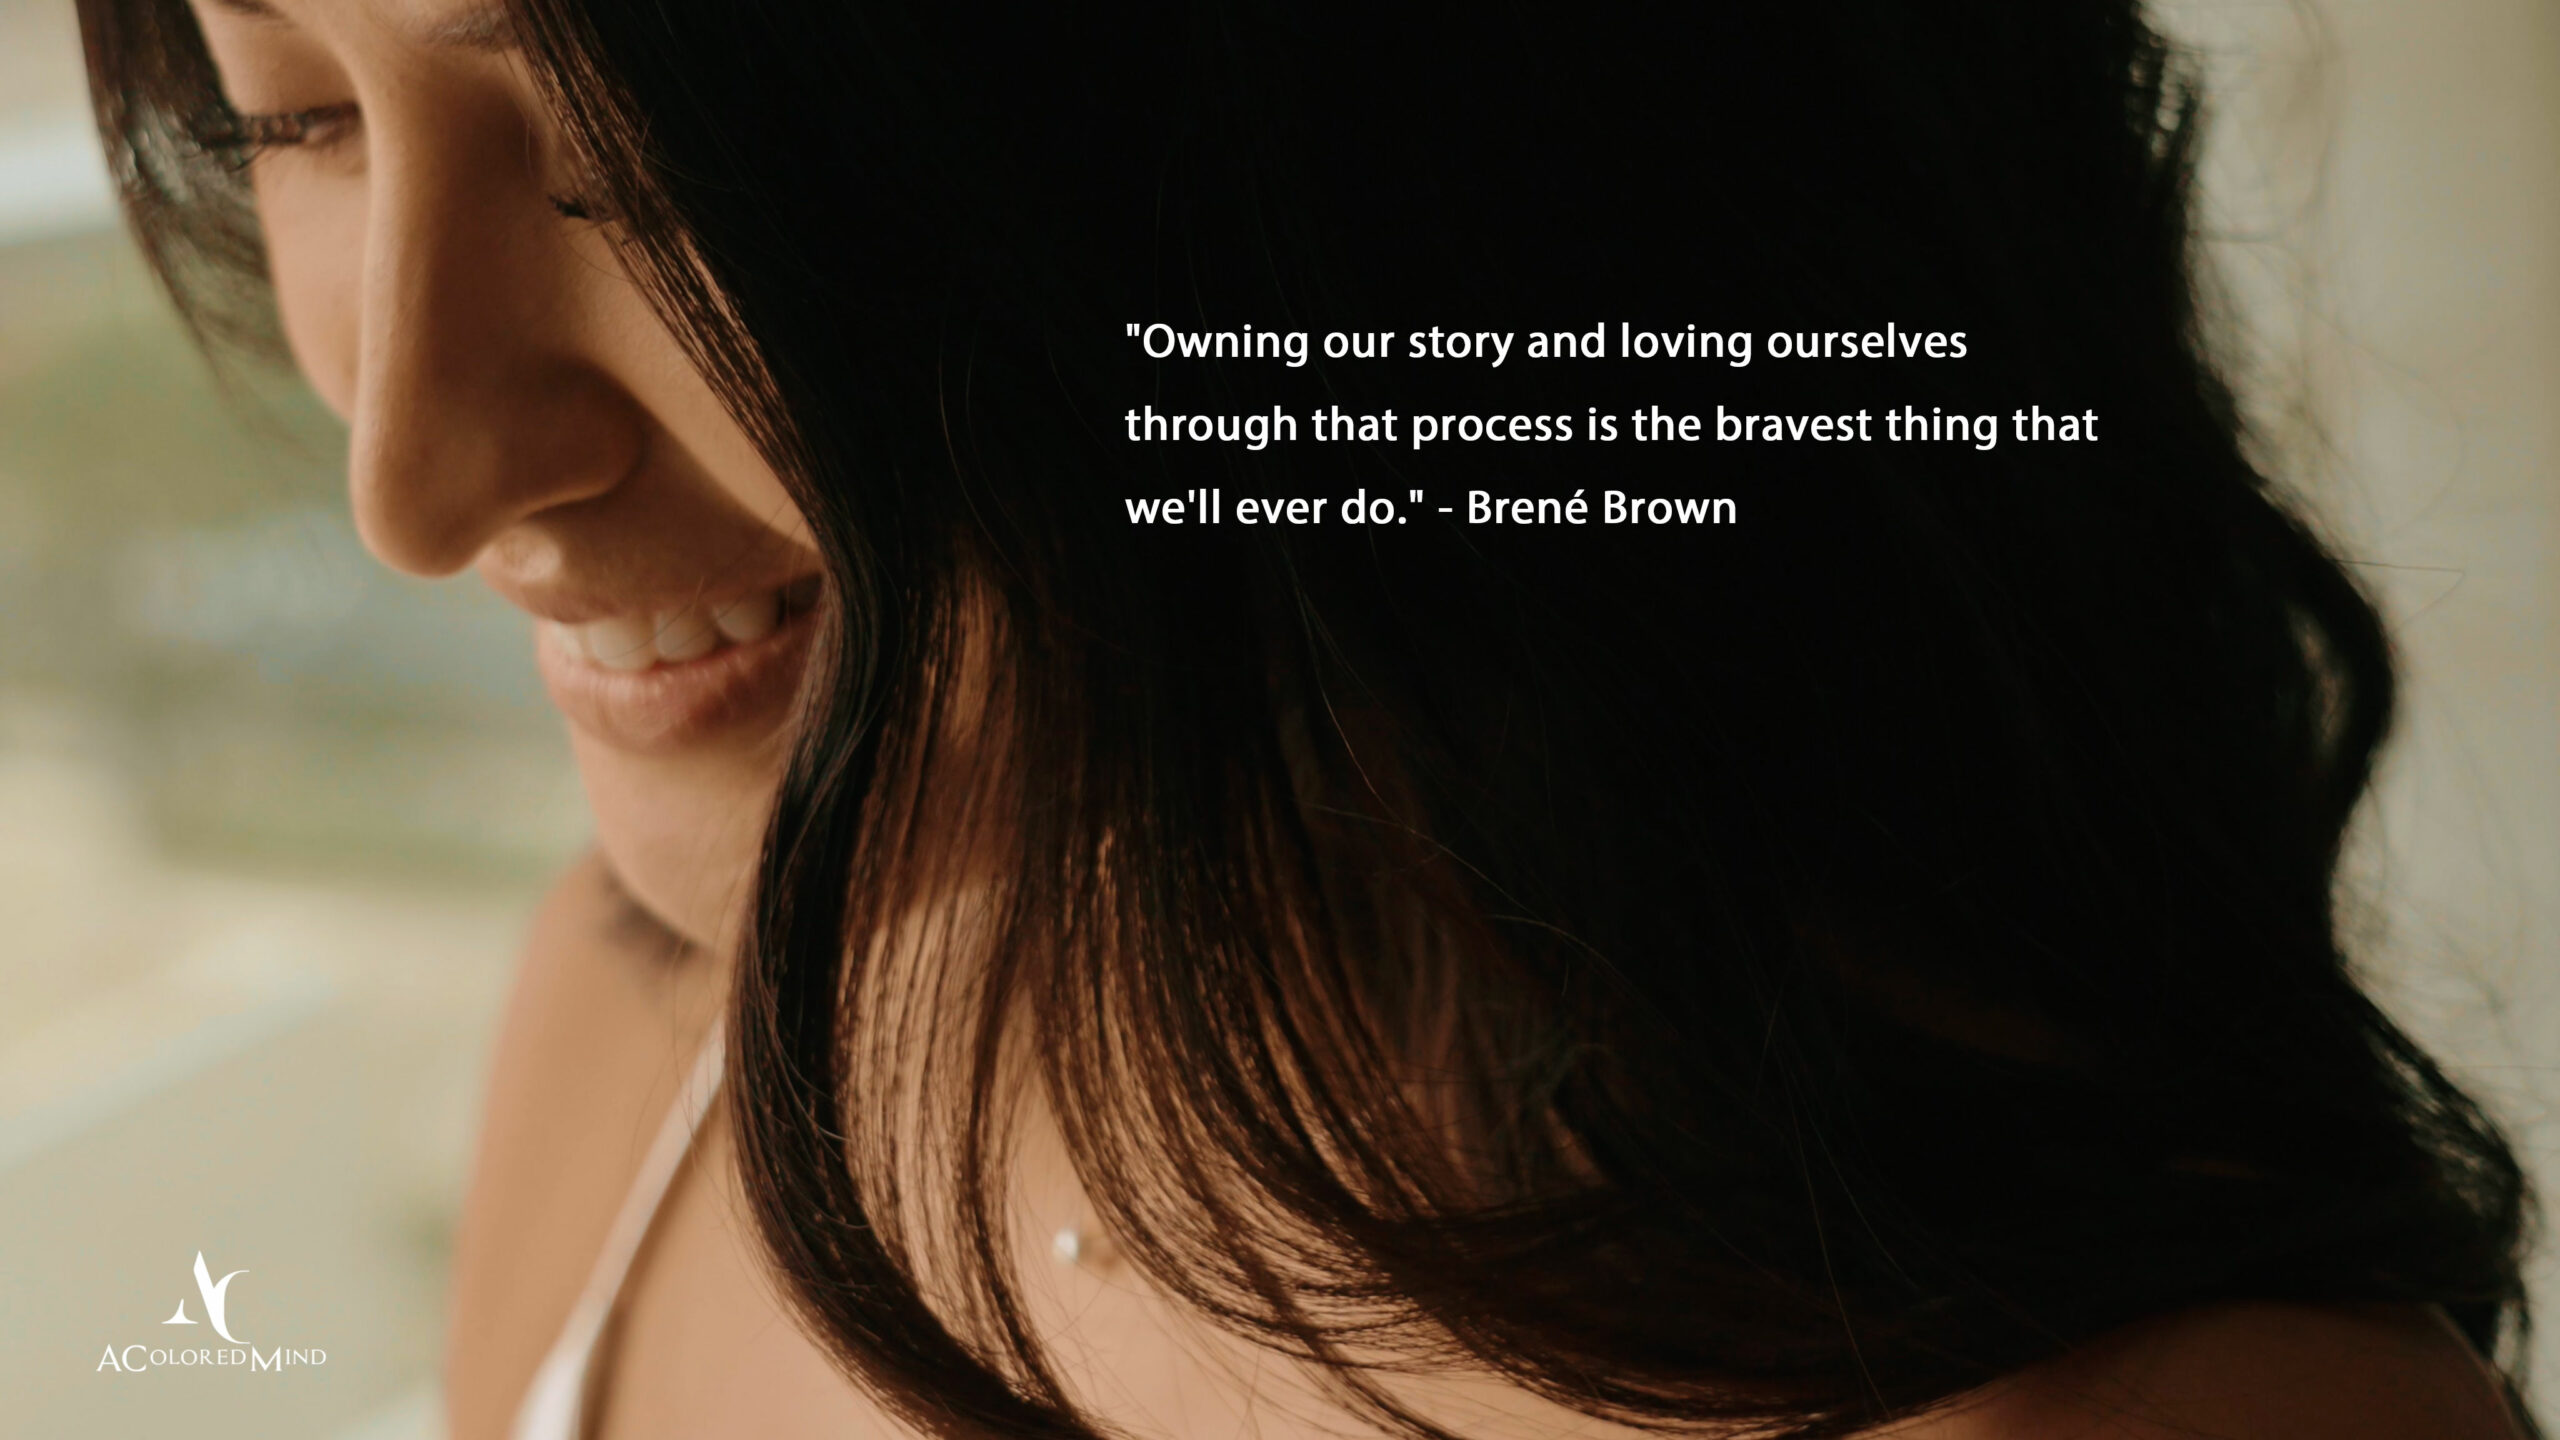 "Owning our story and loving ourselves through that process is the bravest thing that we'll ever do." - Brené Brown